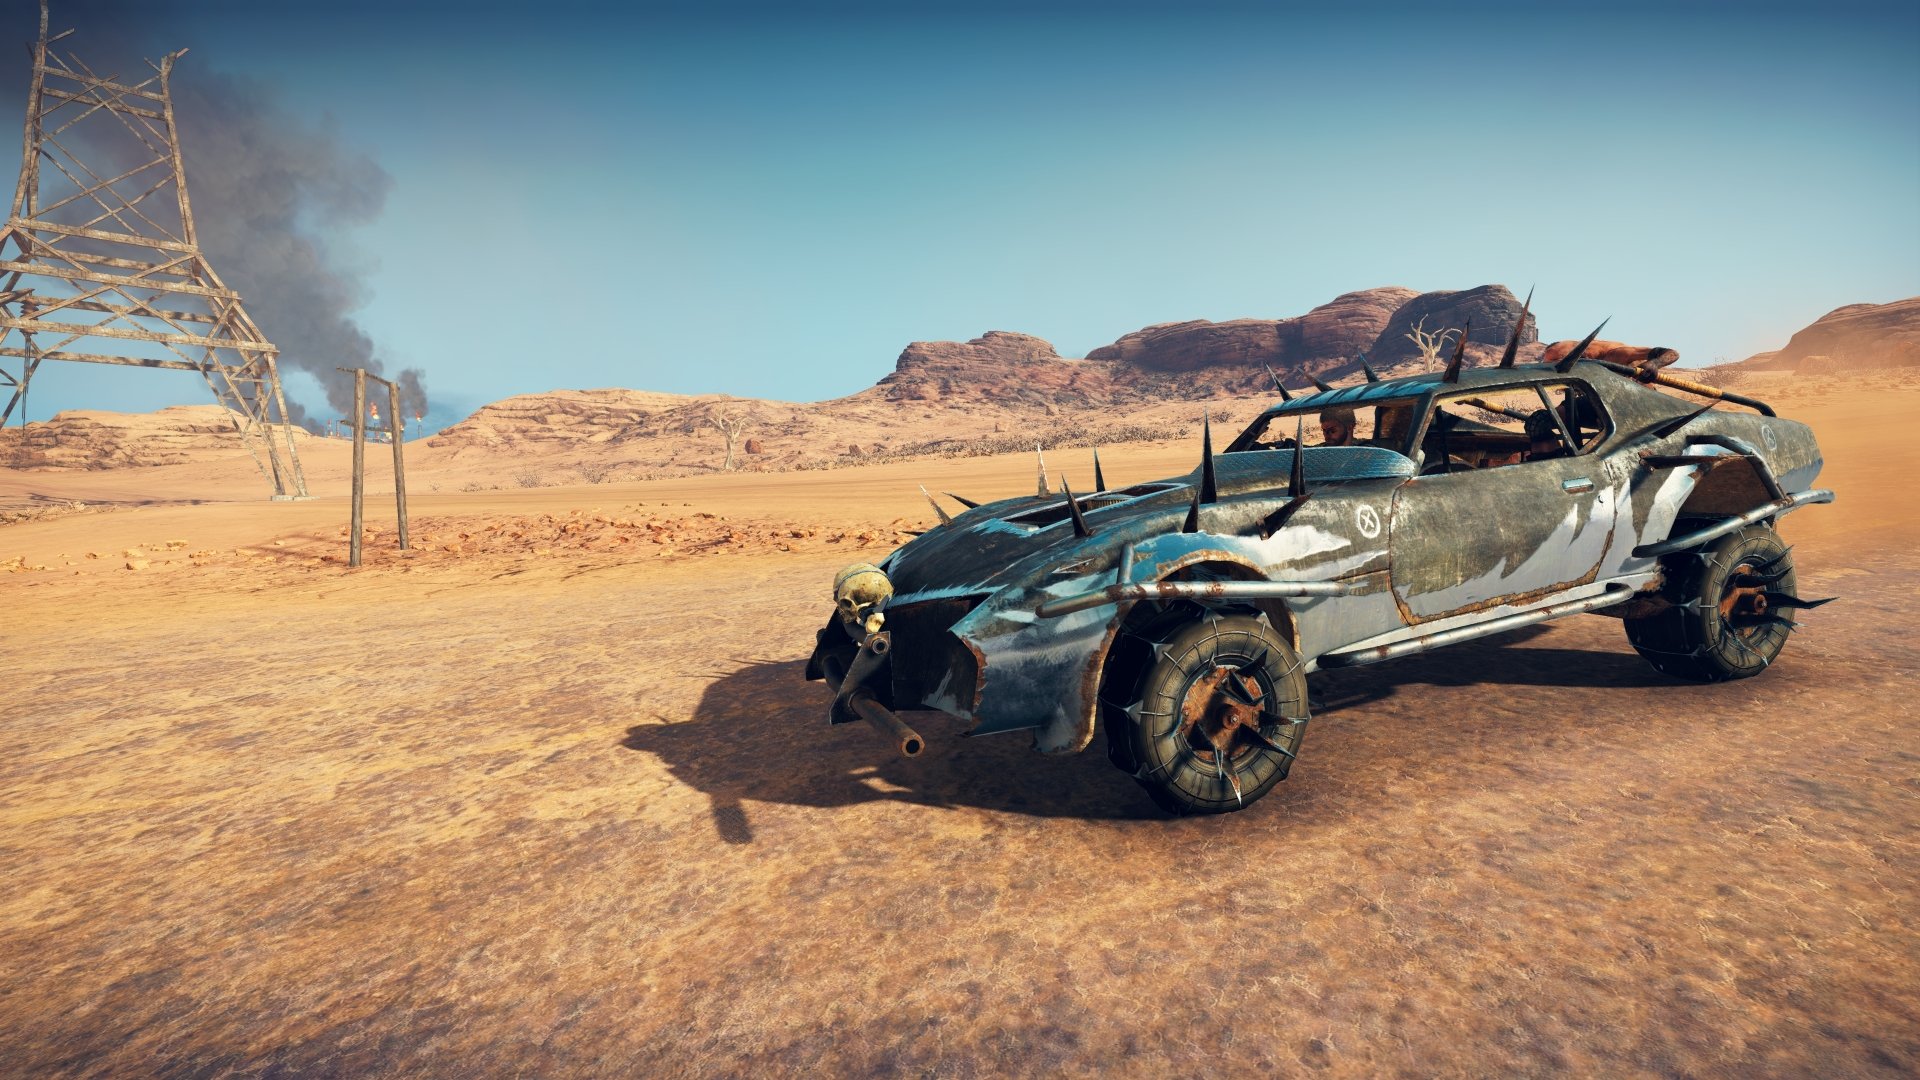 General 1920x1080 PC gaming video games Mad Max (game) desert apocalyptic car Mad Max screen shot